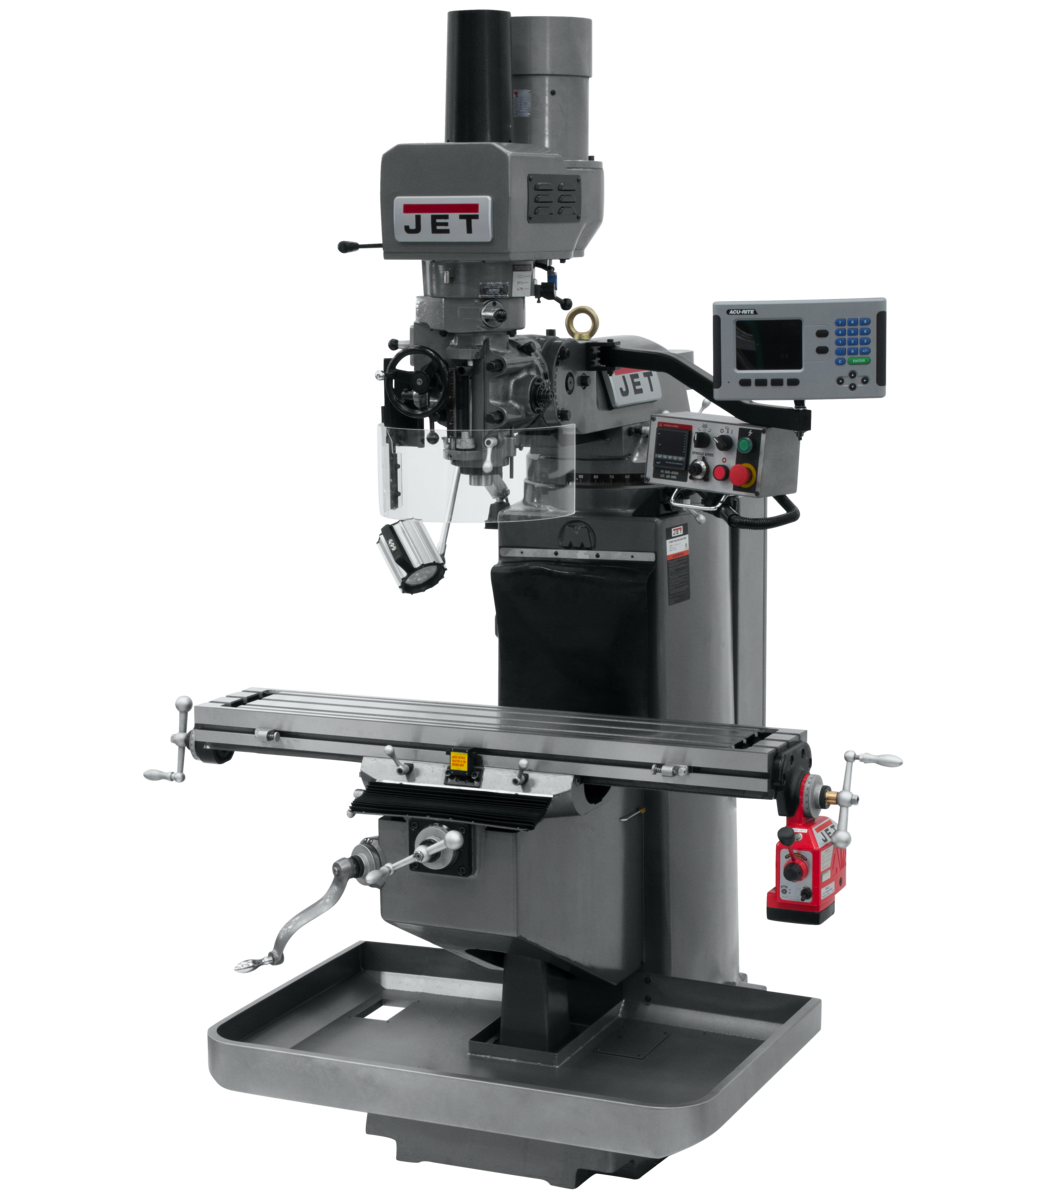 JTM-949EVS Mill With 3-Axis Acu-Rite 203 DRO (Quill) With X-Axis Powerfeed and Air Powered Draw Bar